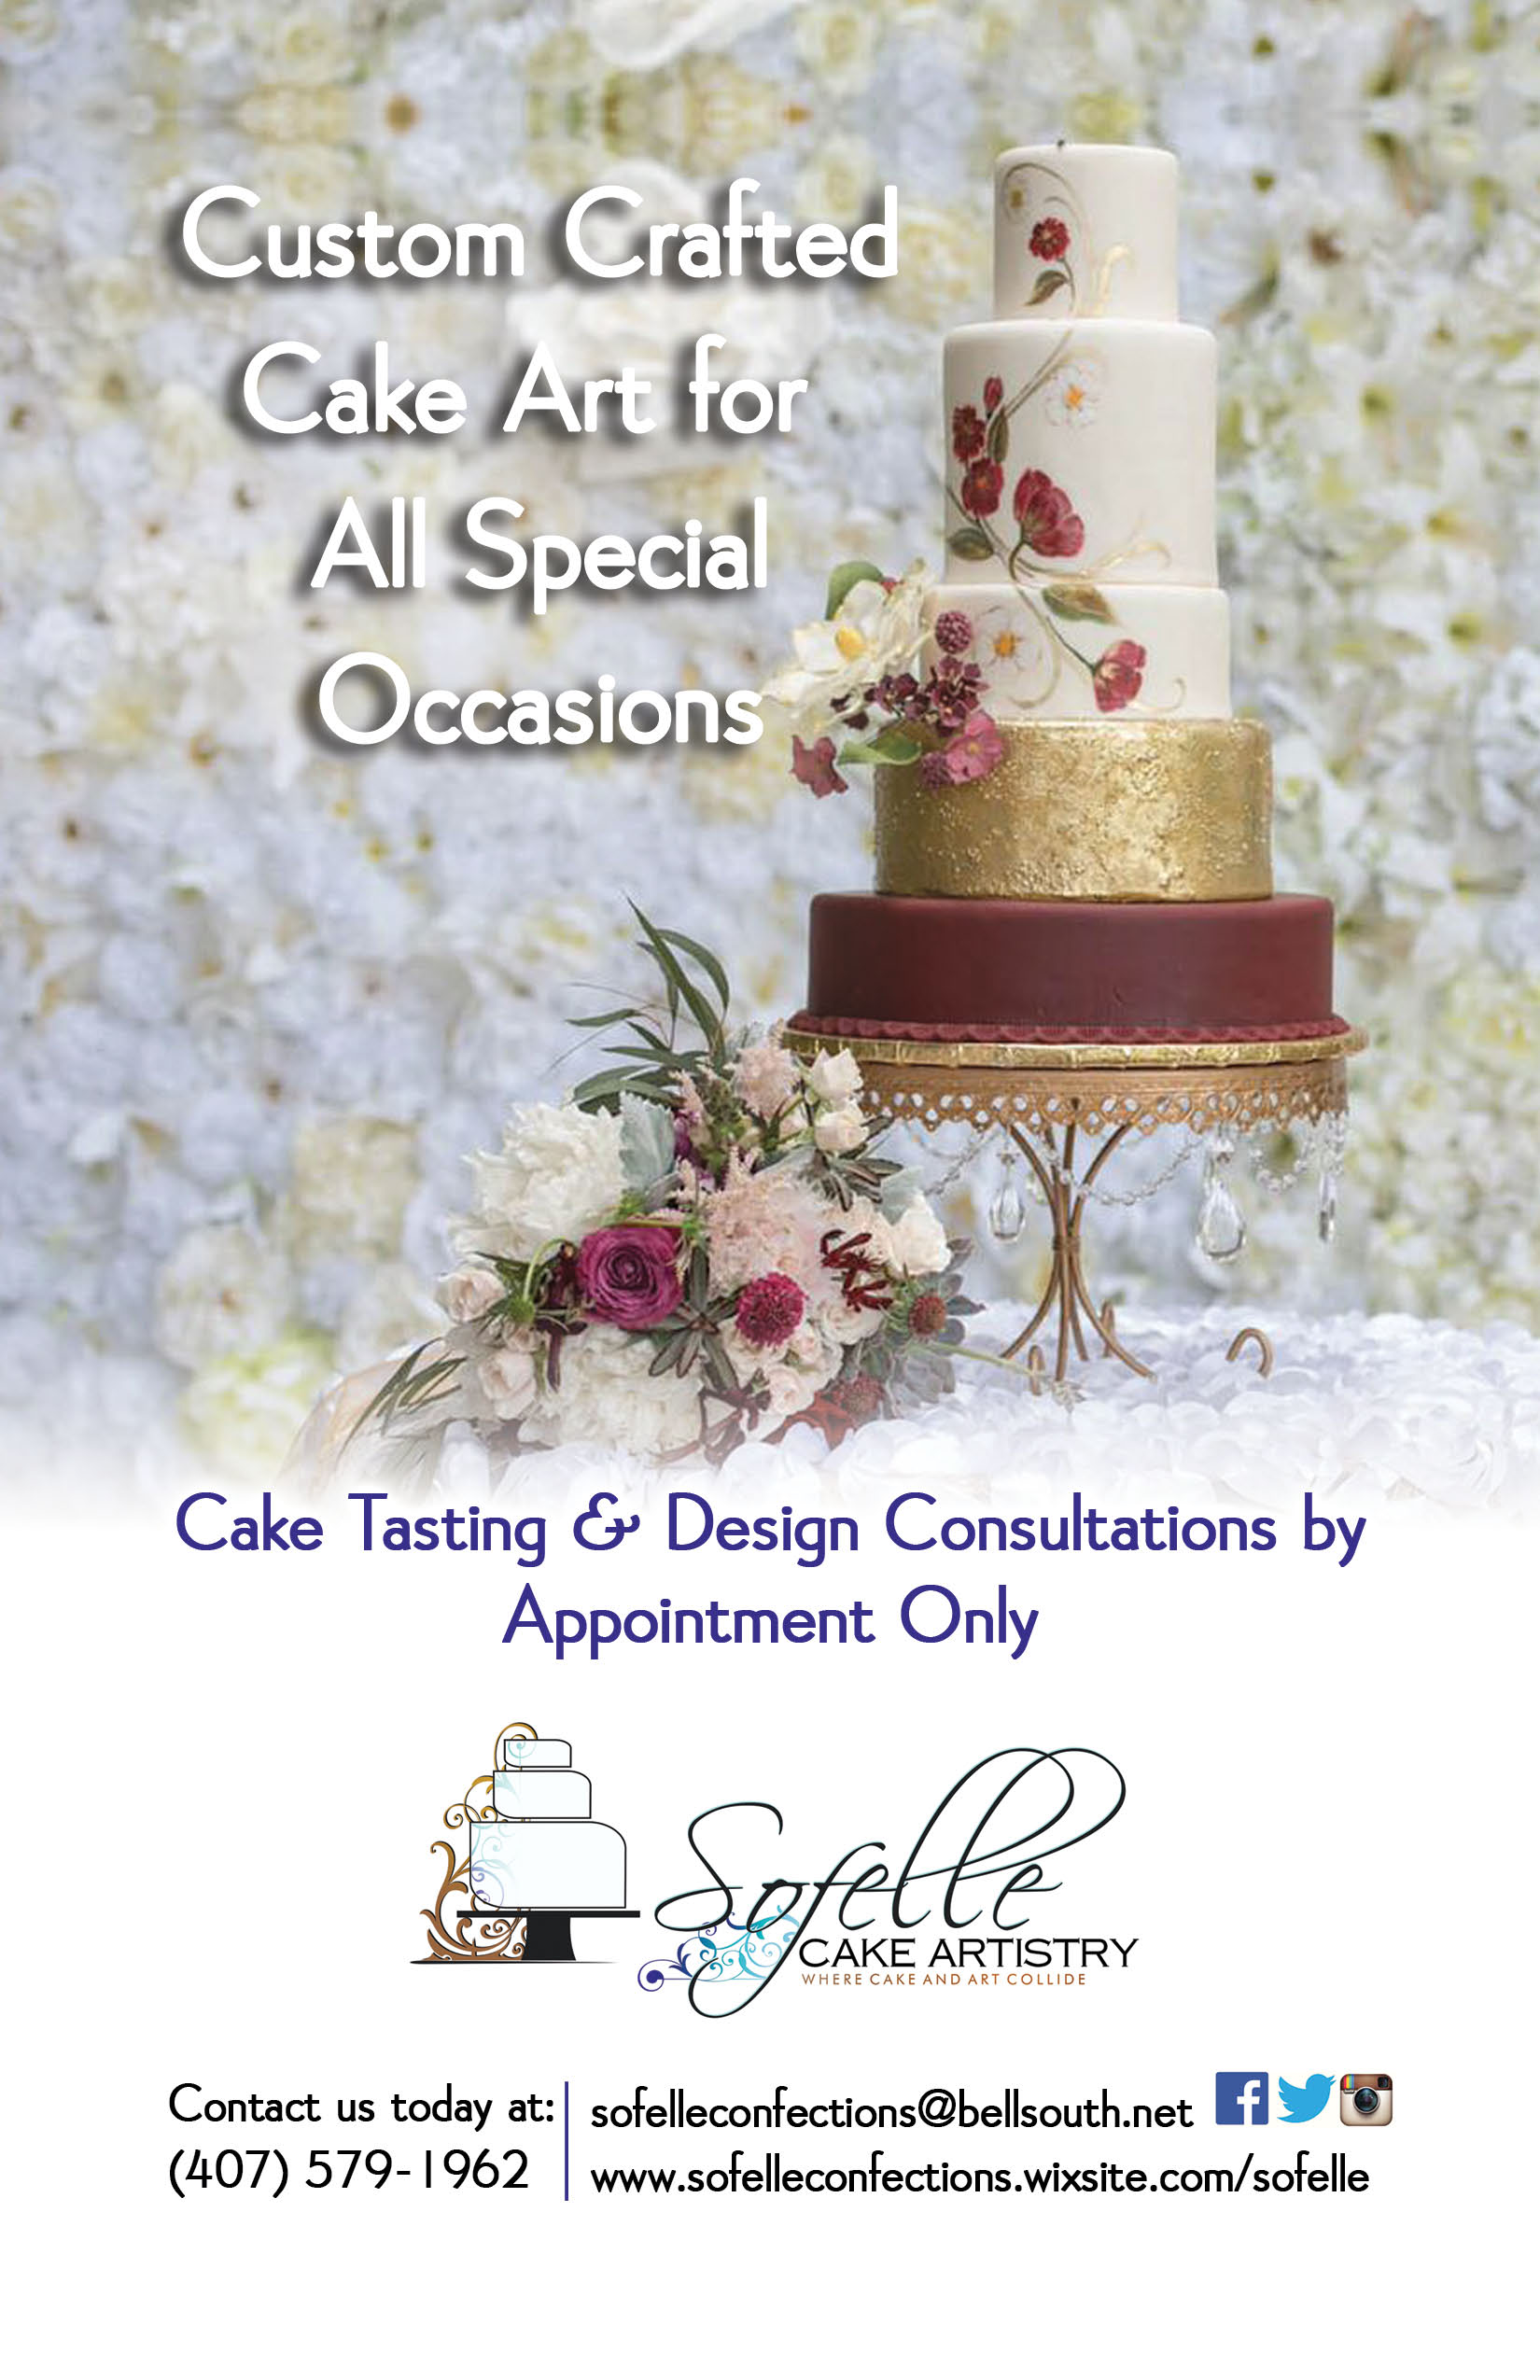 Sofelle Confections